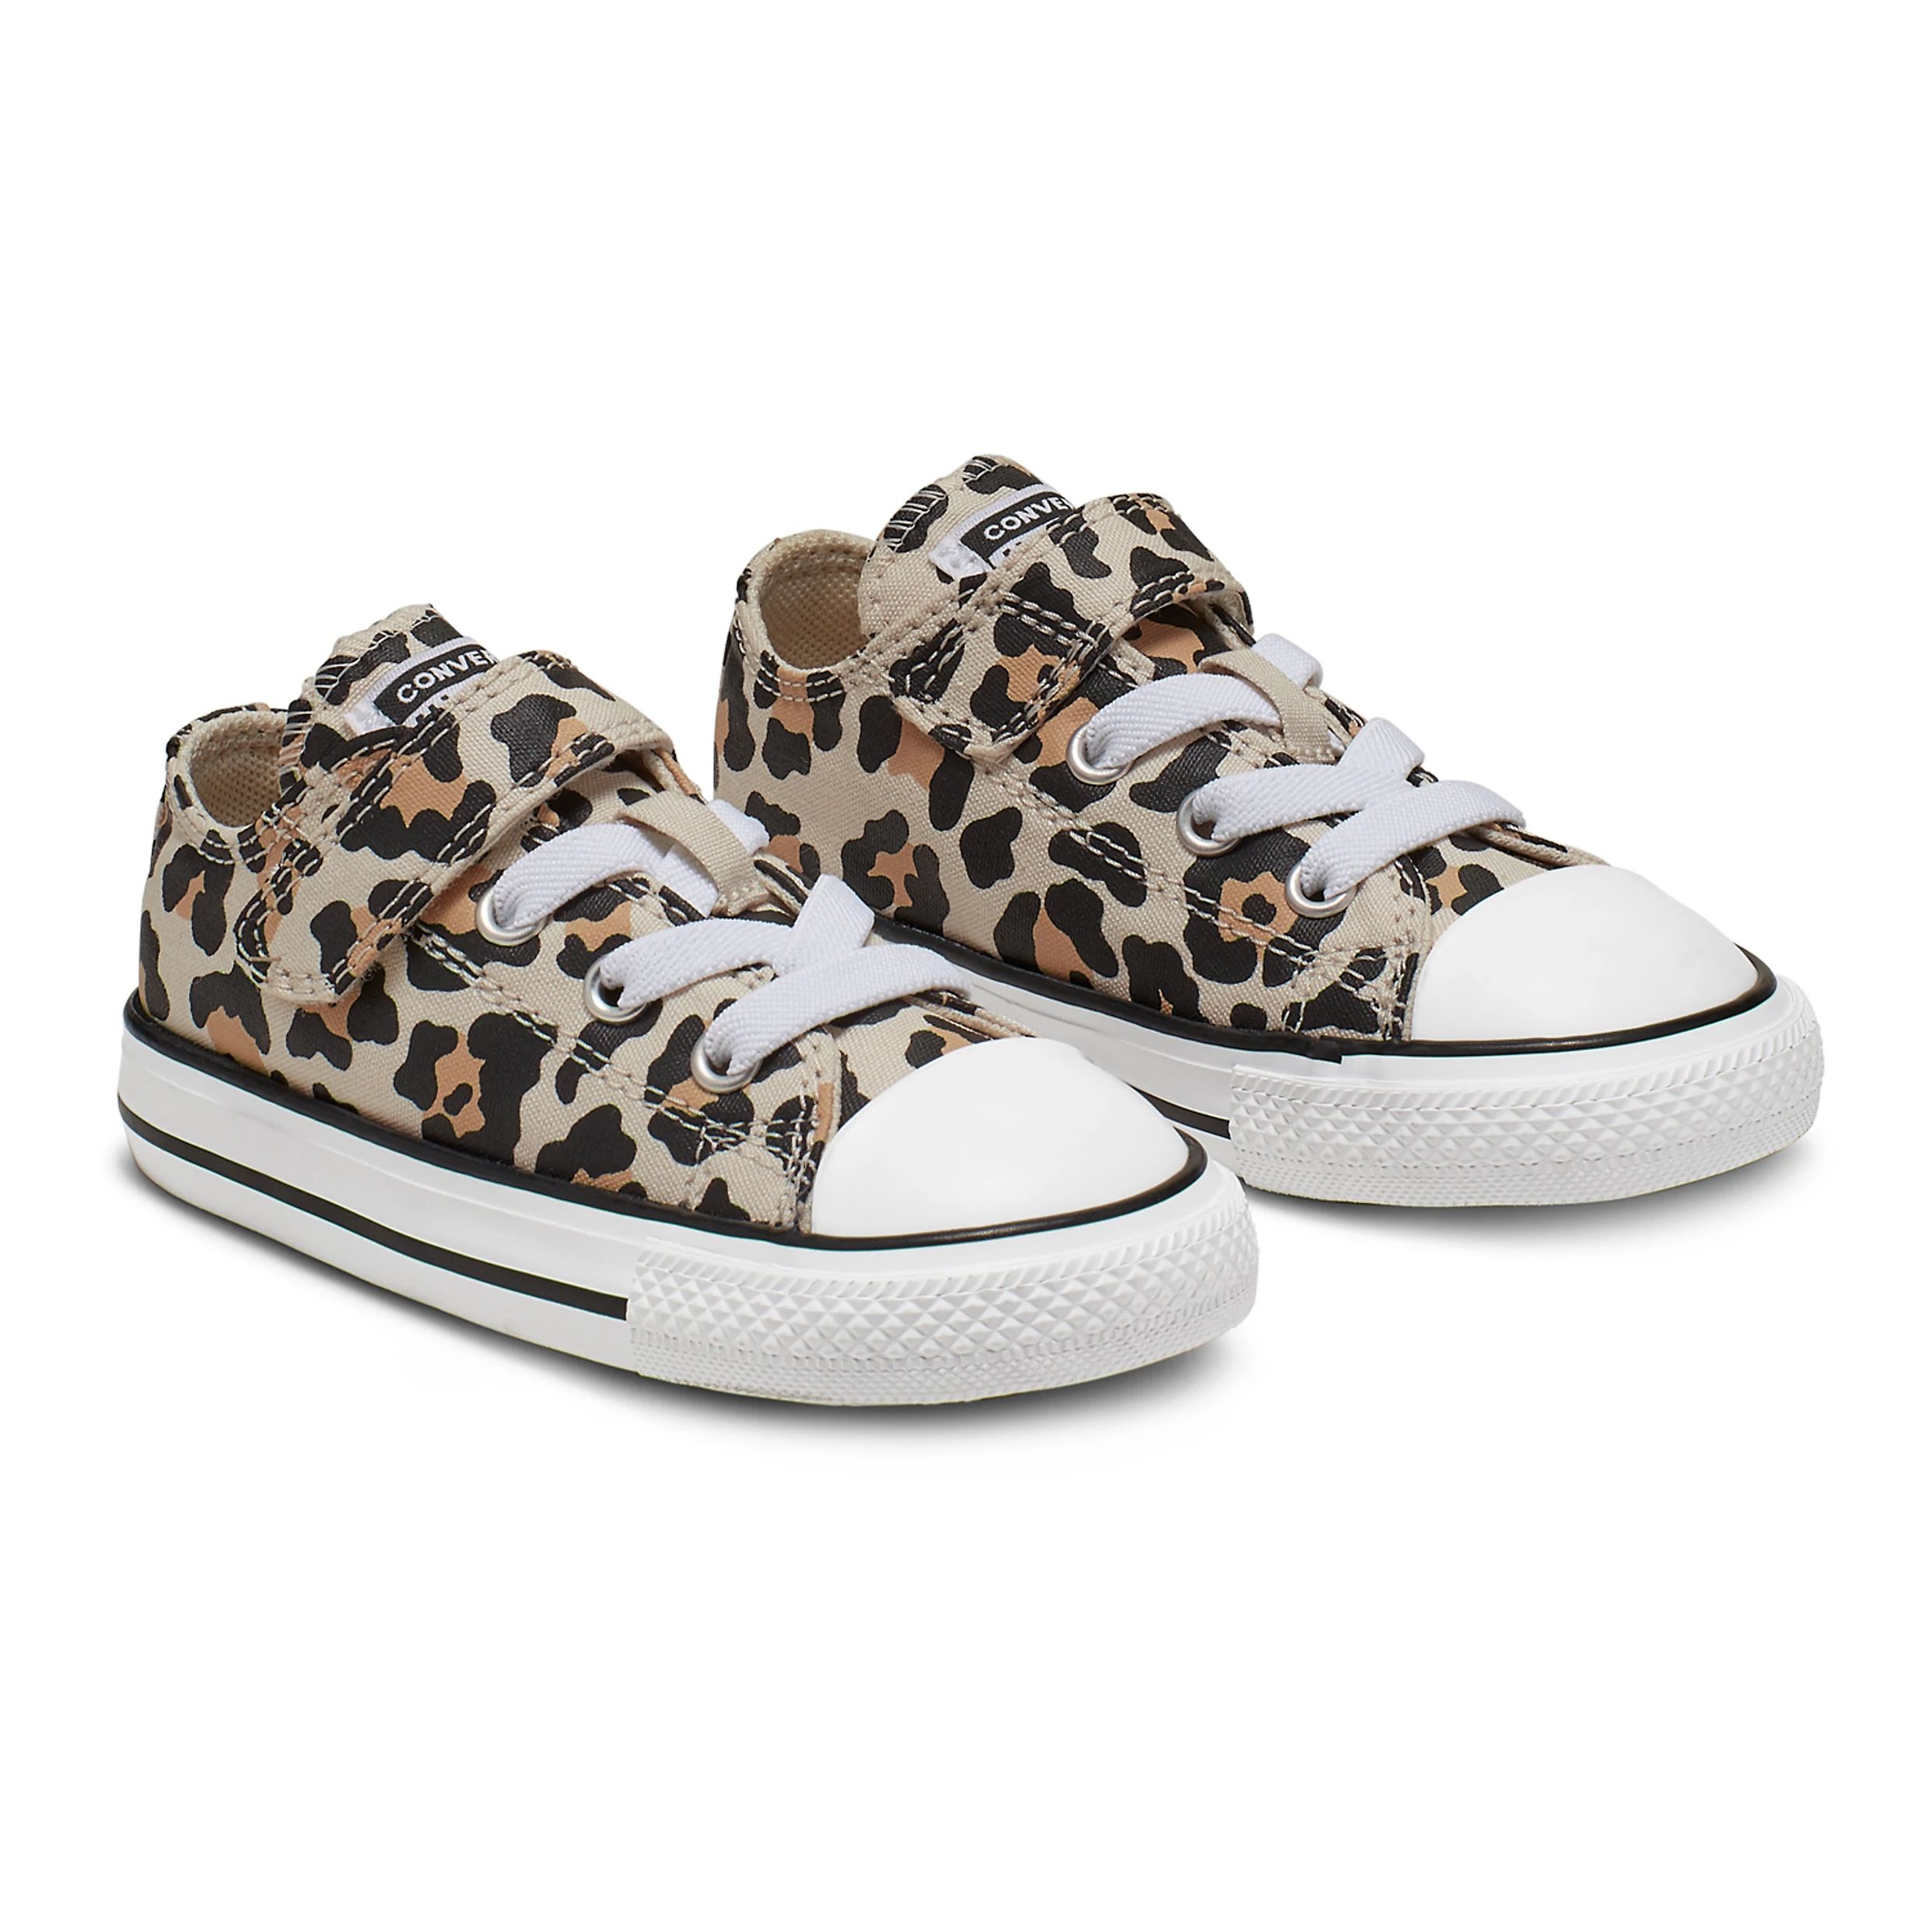 Toddler Girls' Converse Chuck Taylor All Star Leopard Sneakers | Kohl's